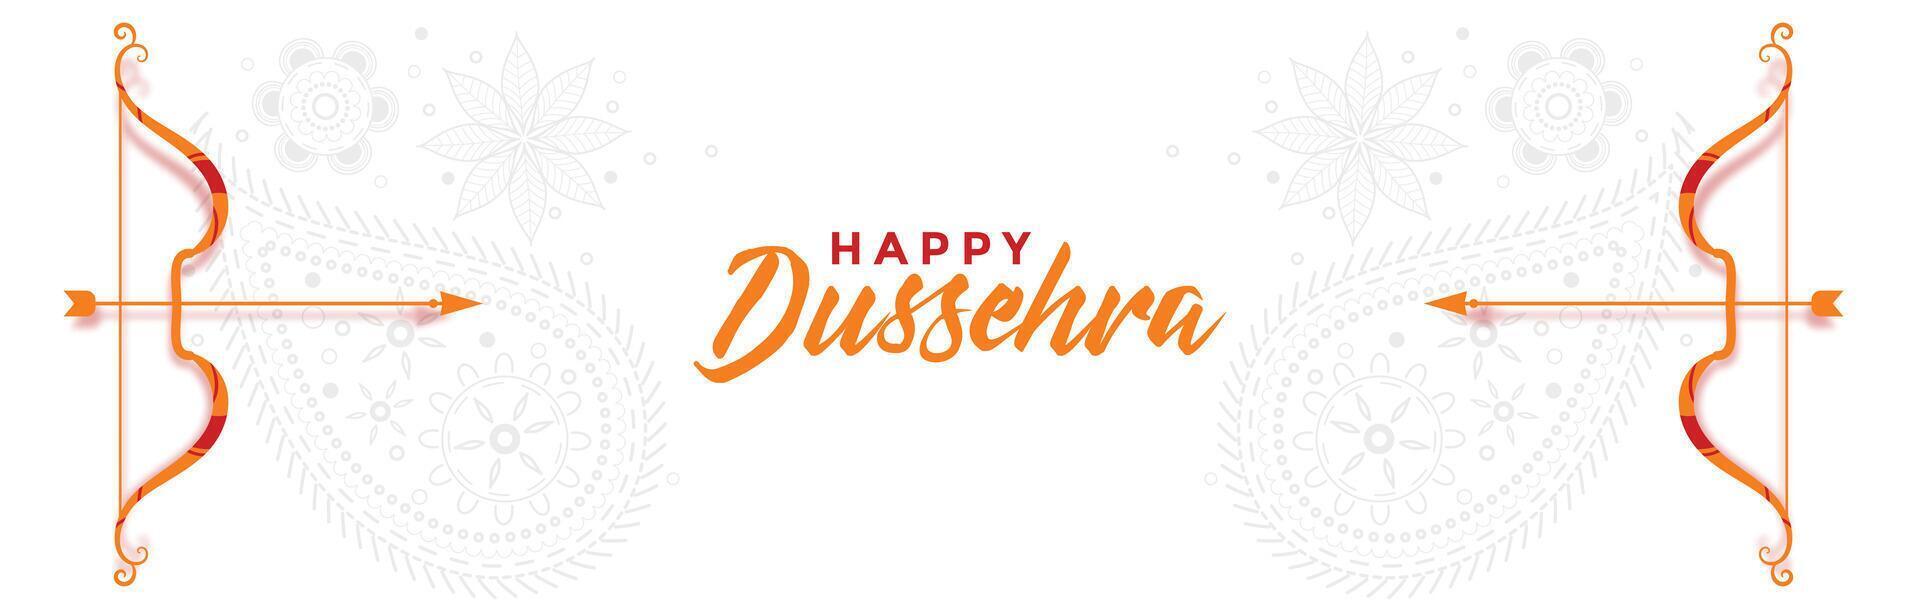 Indian happy dussehra greeting banner with bow and arrow vector